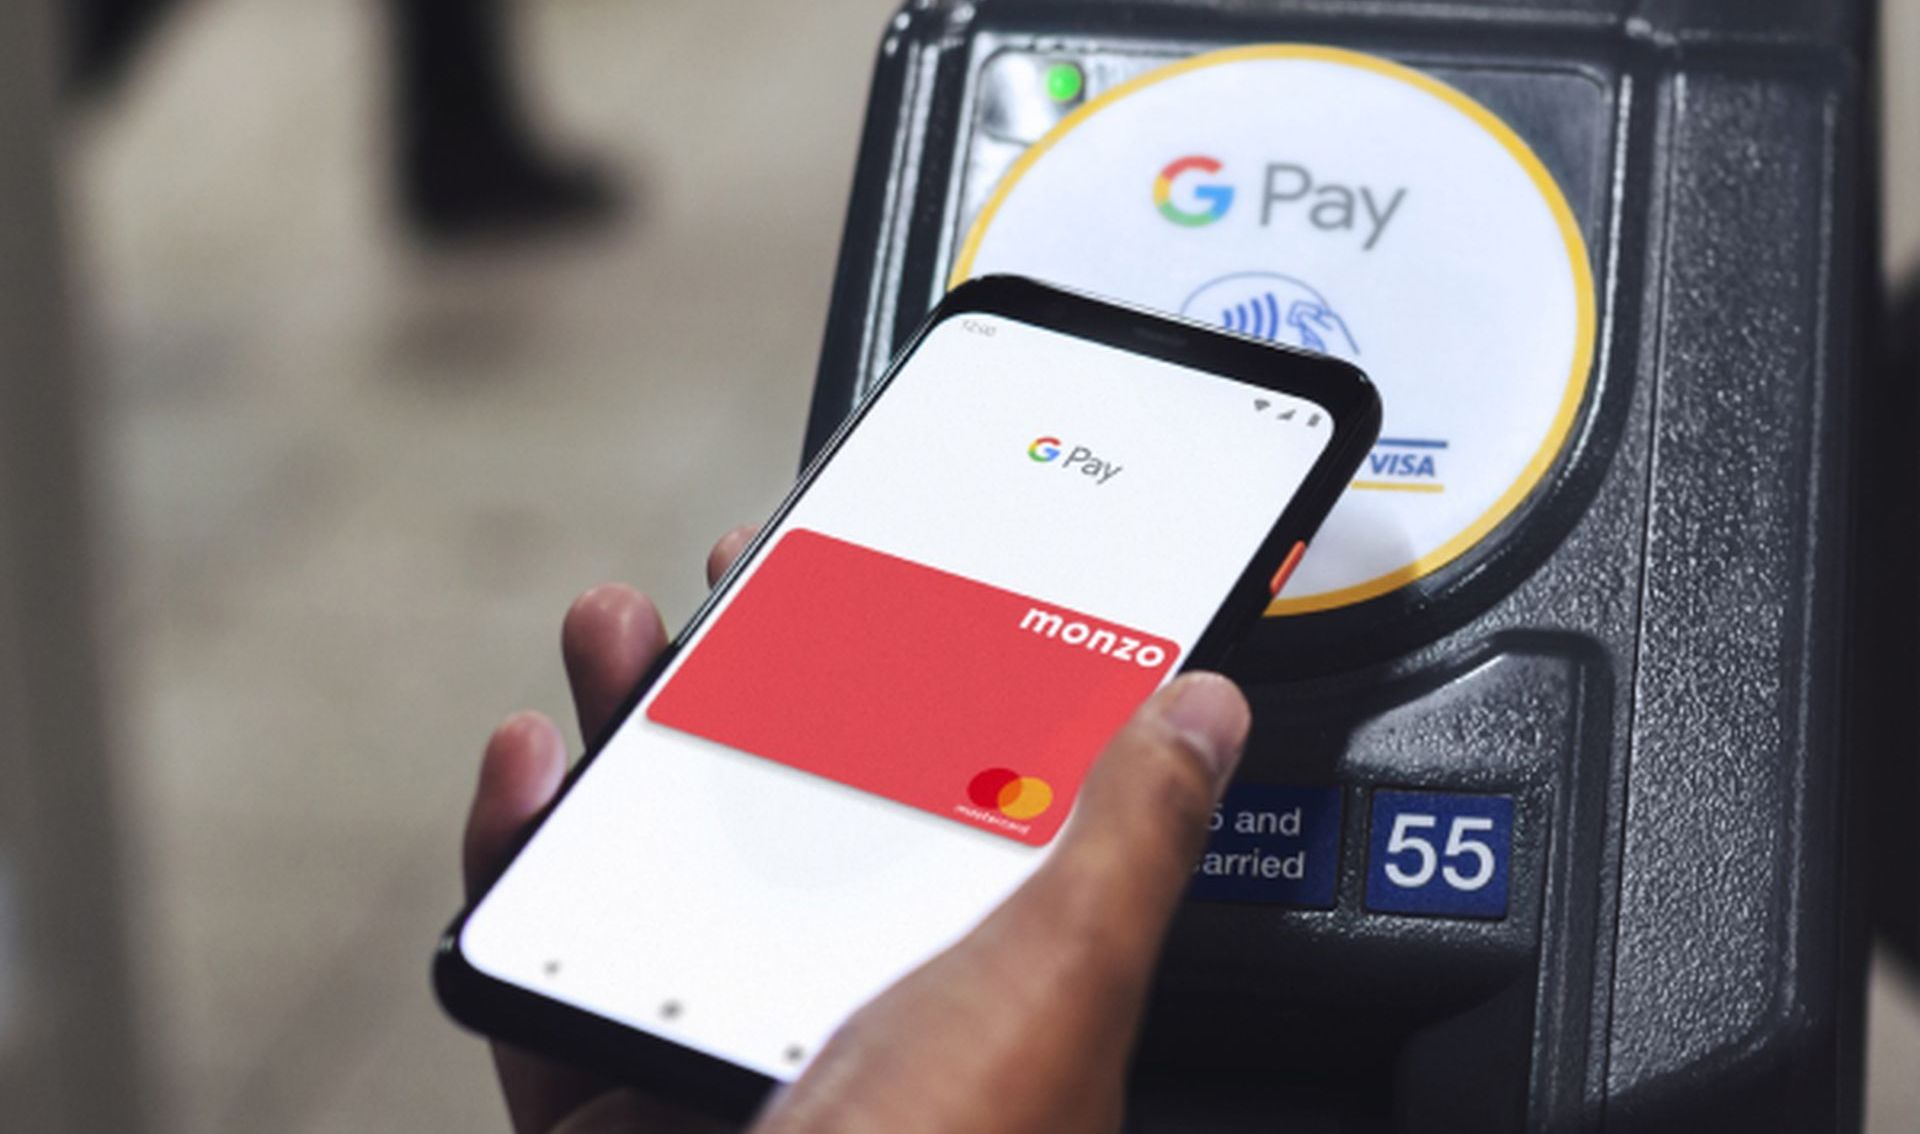 Learn why is Google Wallet not working with our comprehensive guide! Also, there are Google Wallet alternatives worth trying. Explore now!